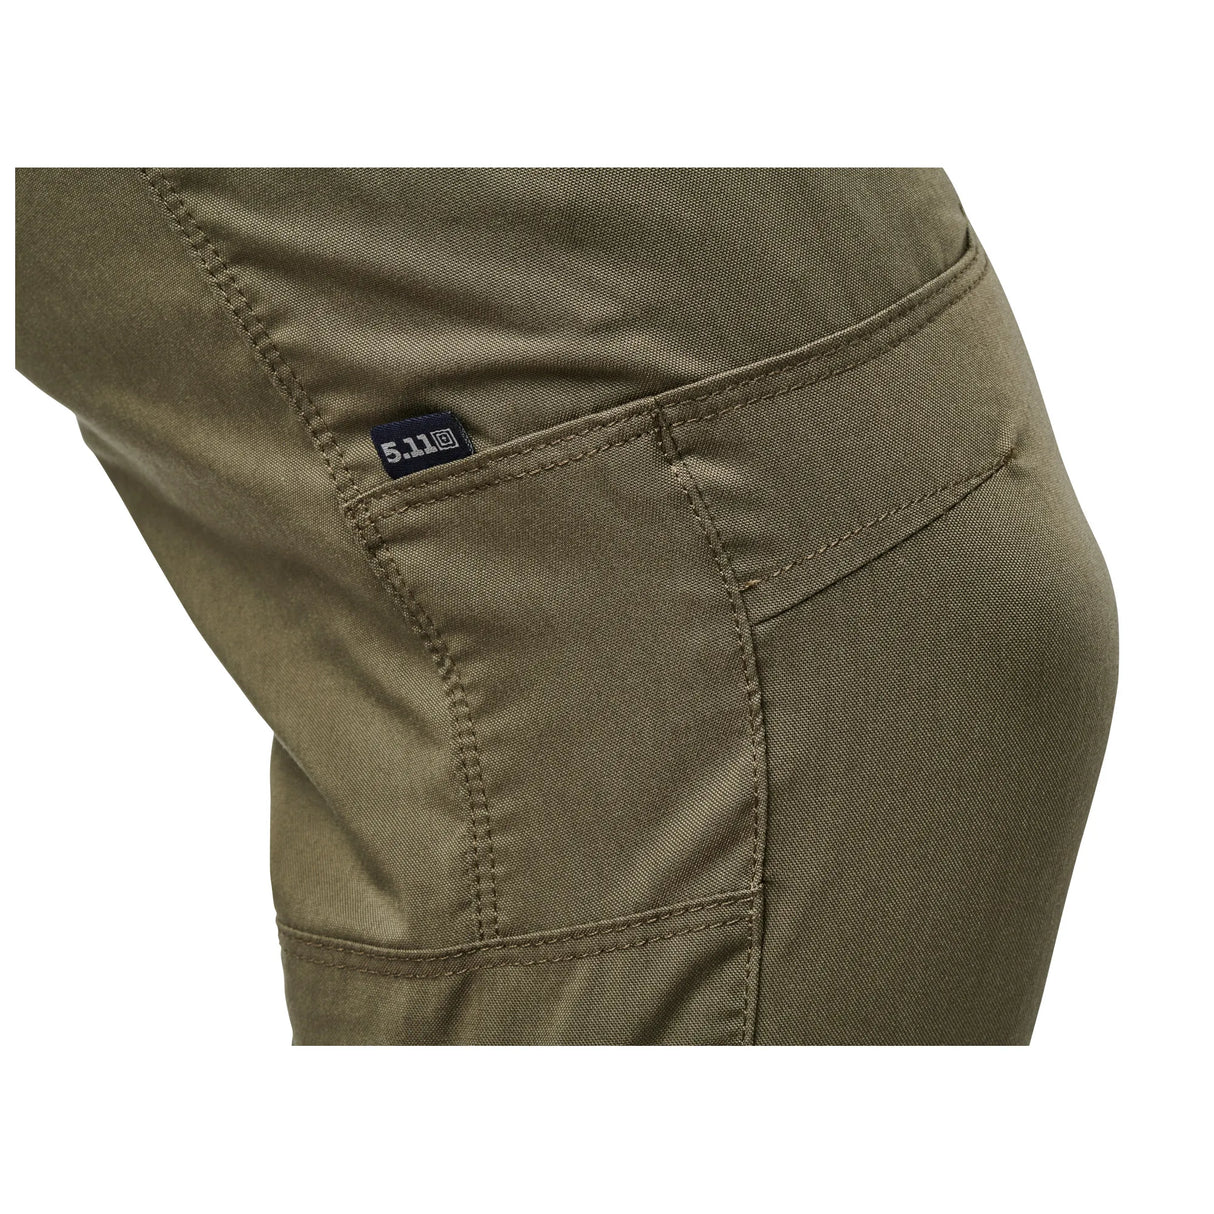 Functionality and Style Combined: Ideal pants for both work and leisure activities.